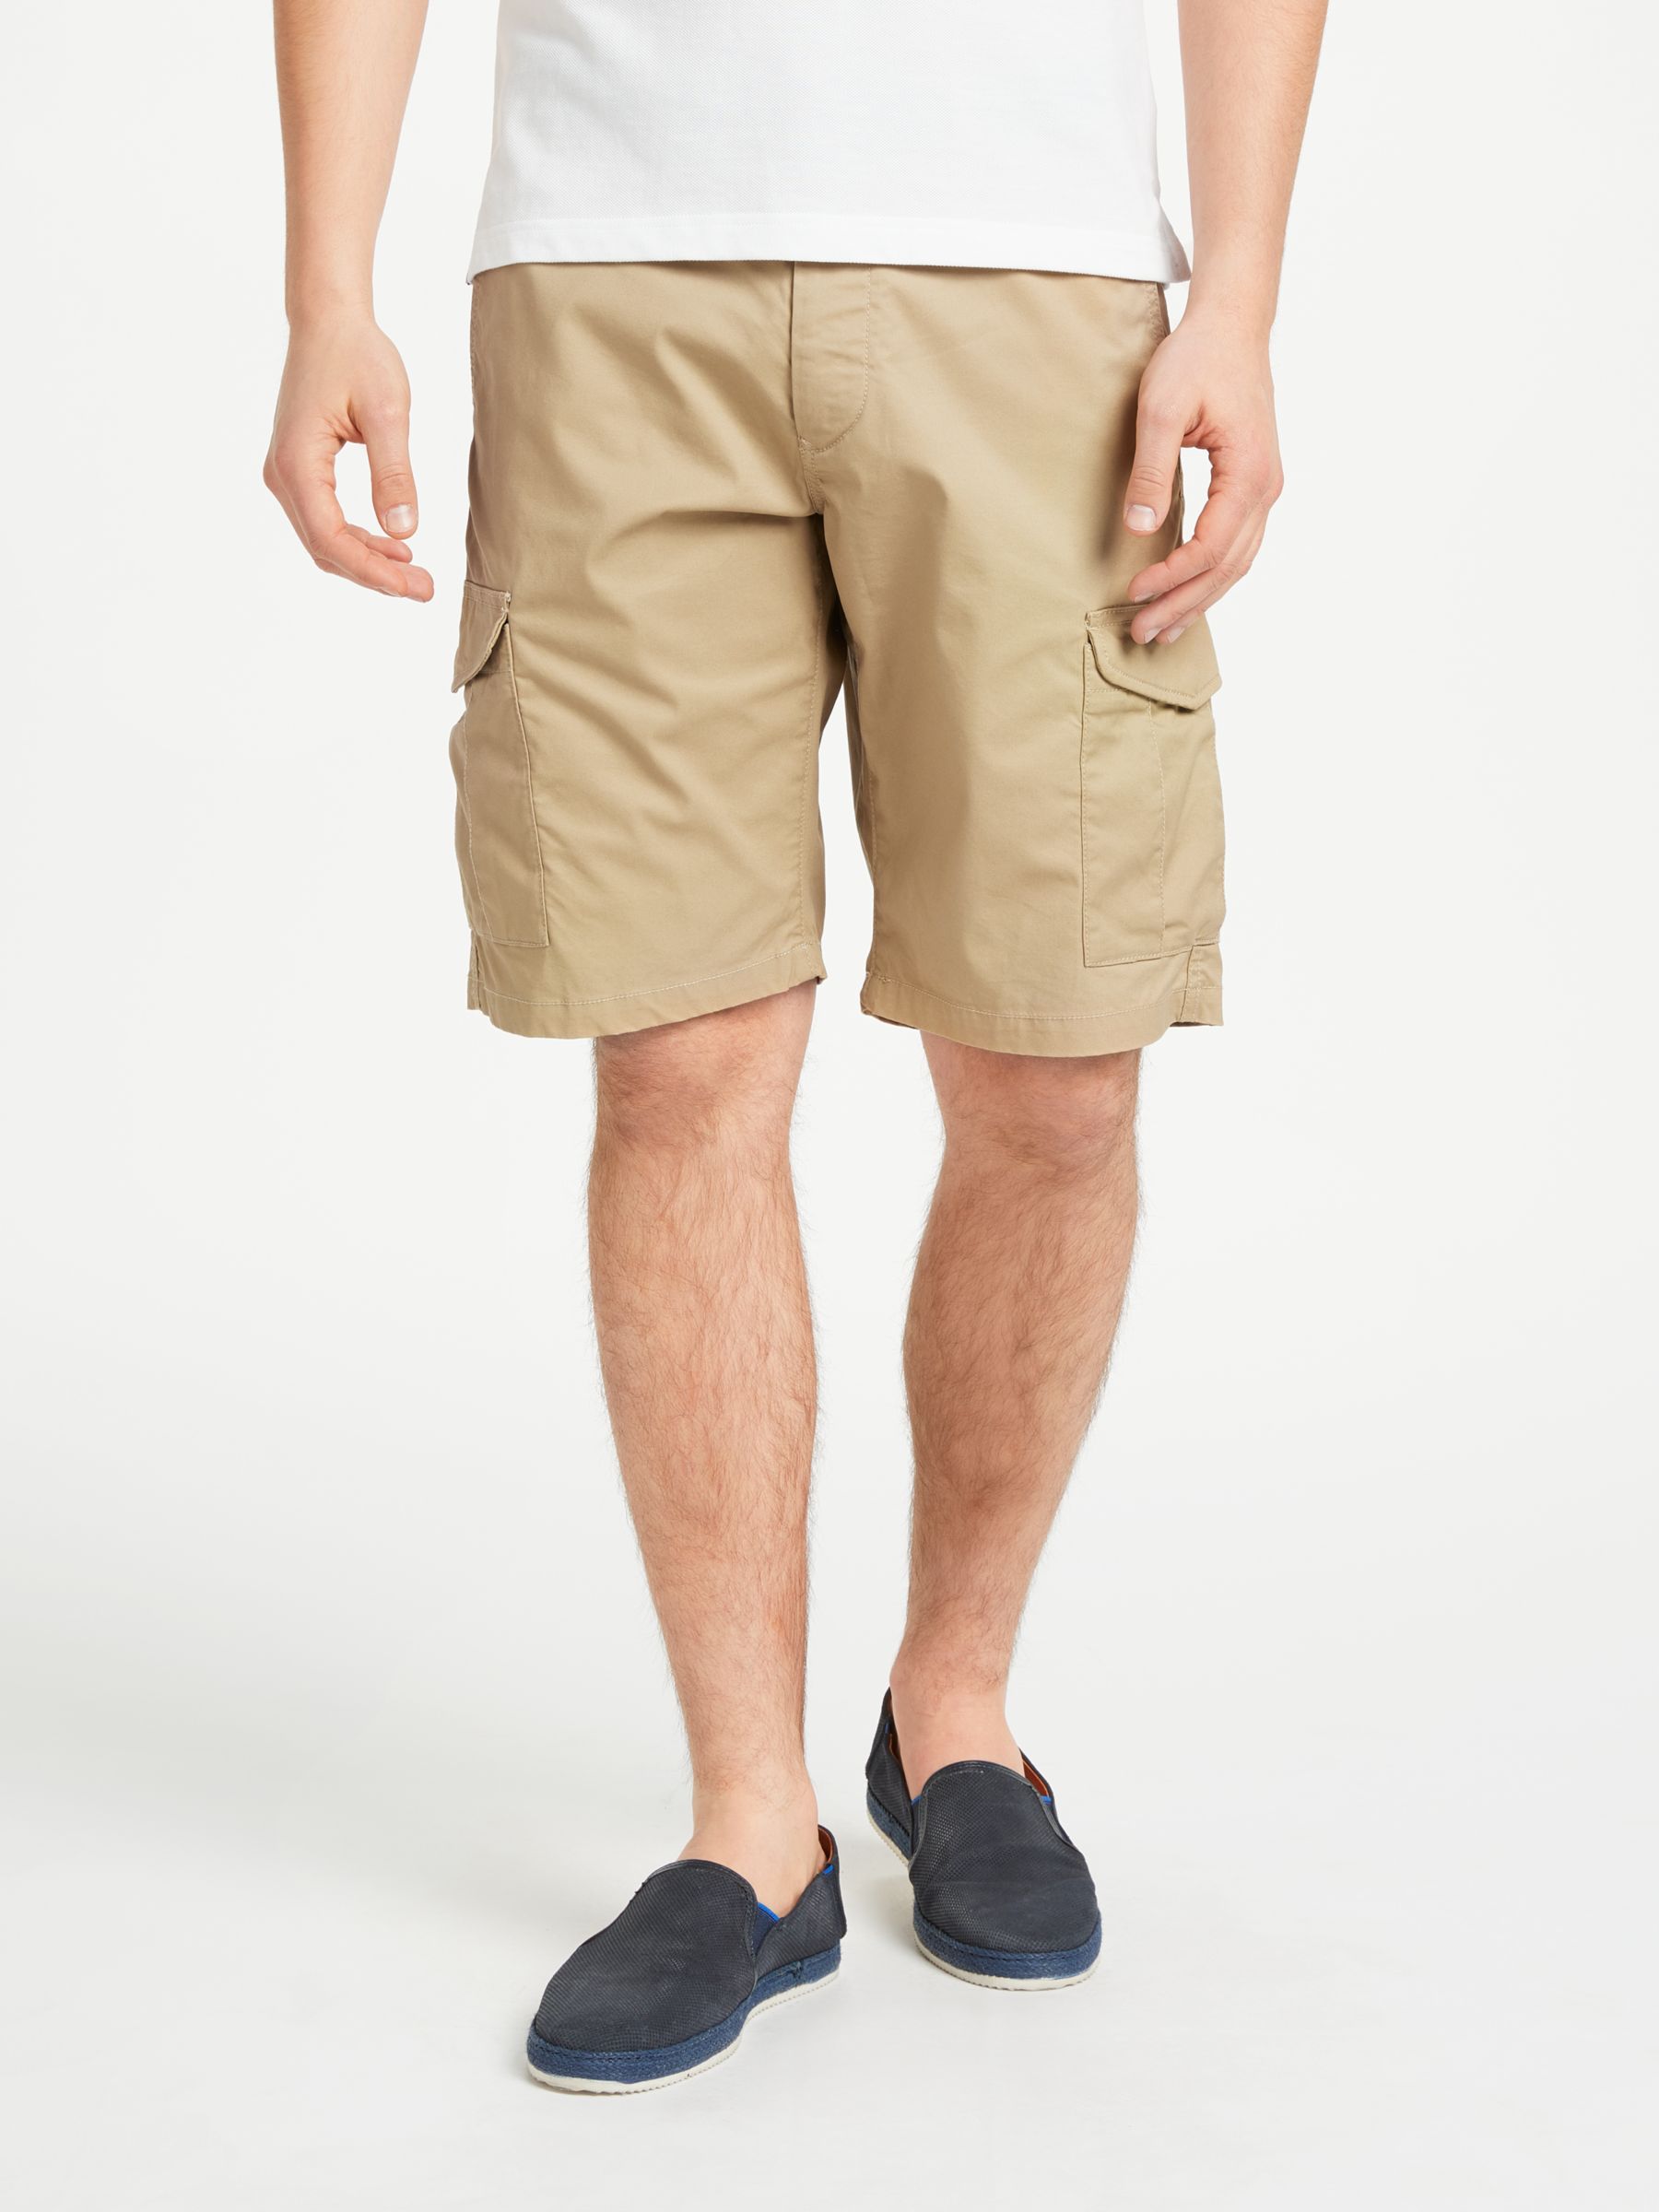 Gant Relaxed Belted Cargo Shorts, Stone, 40R